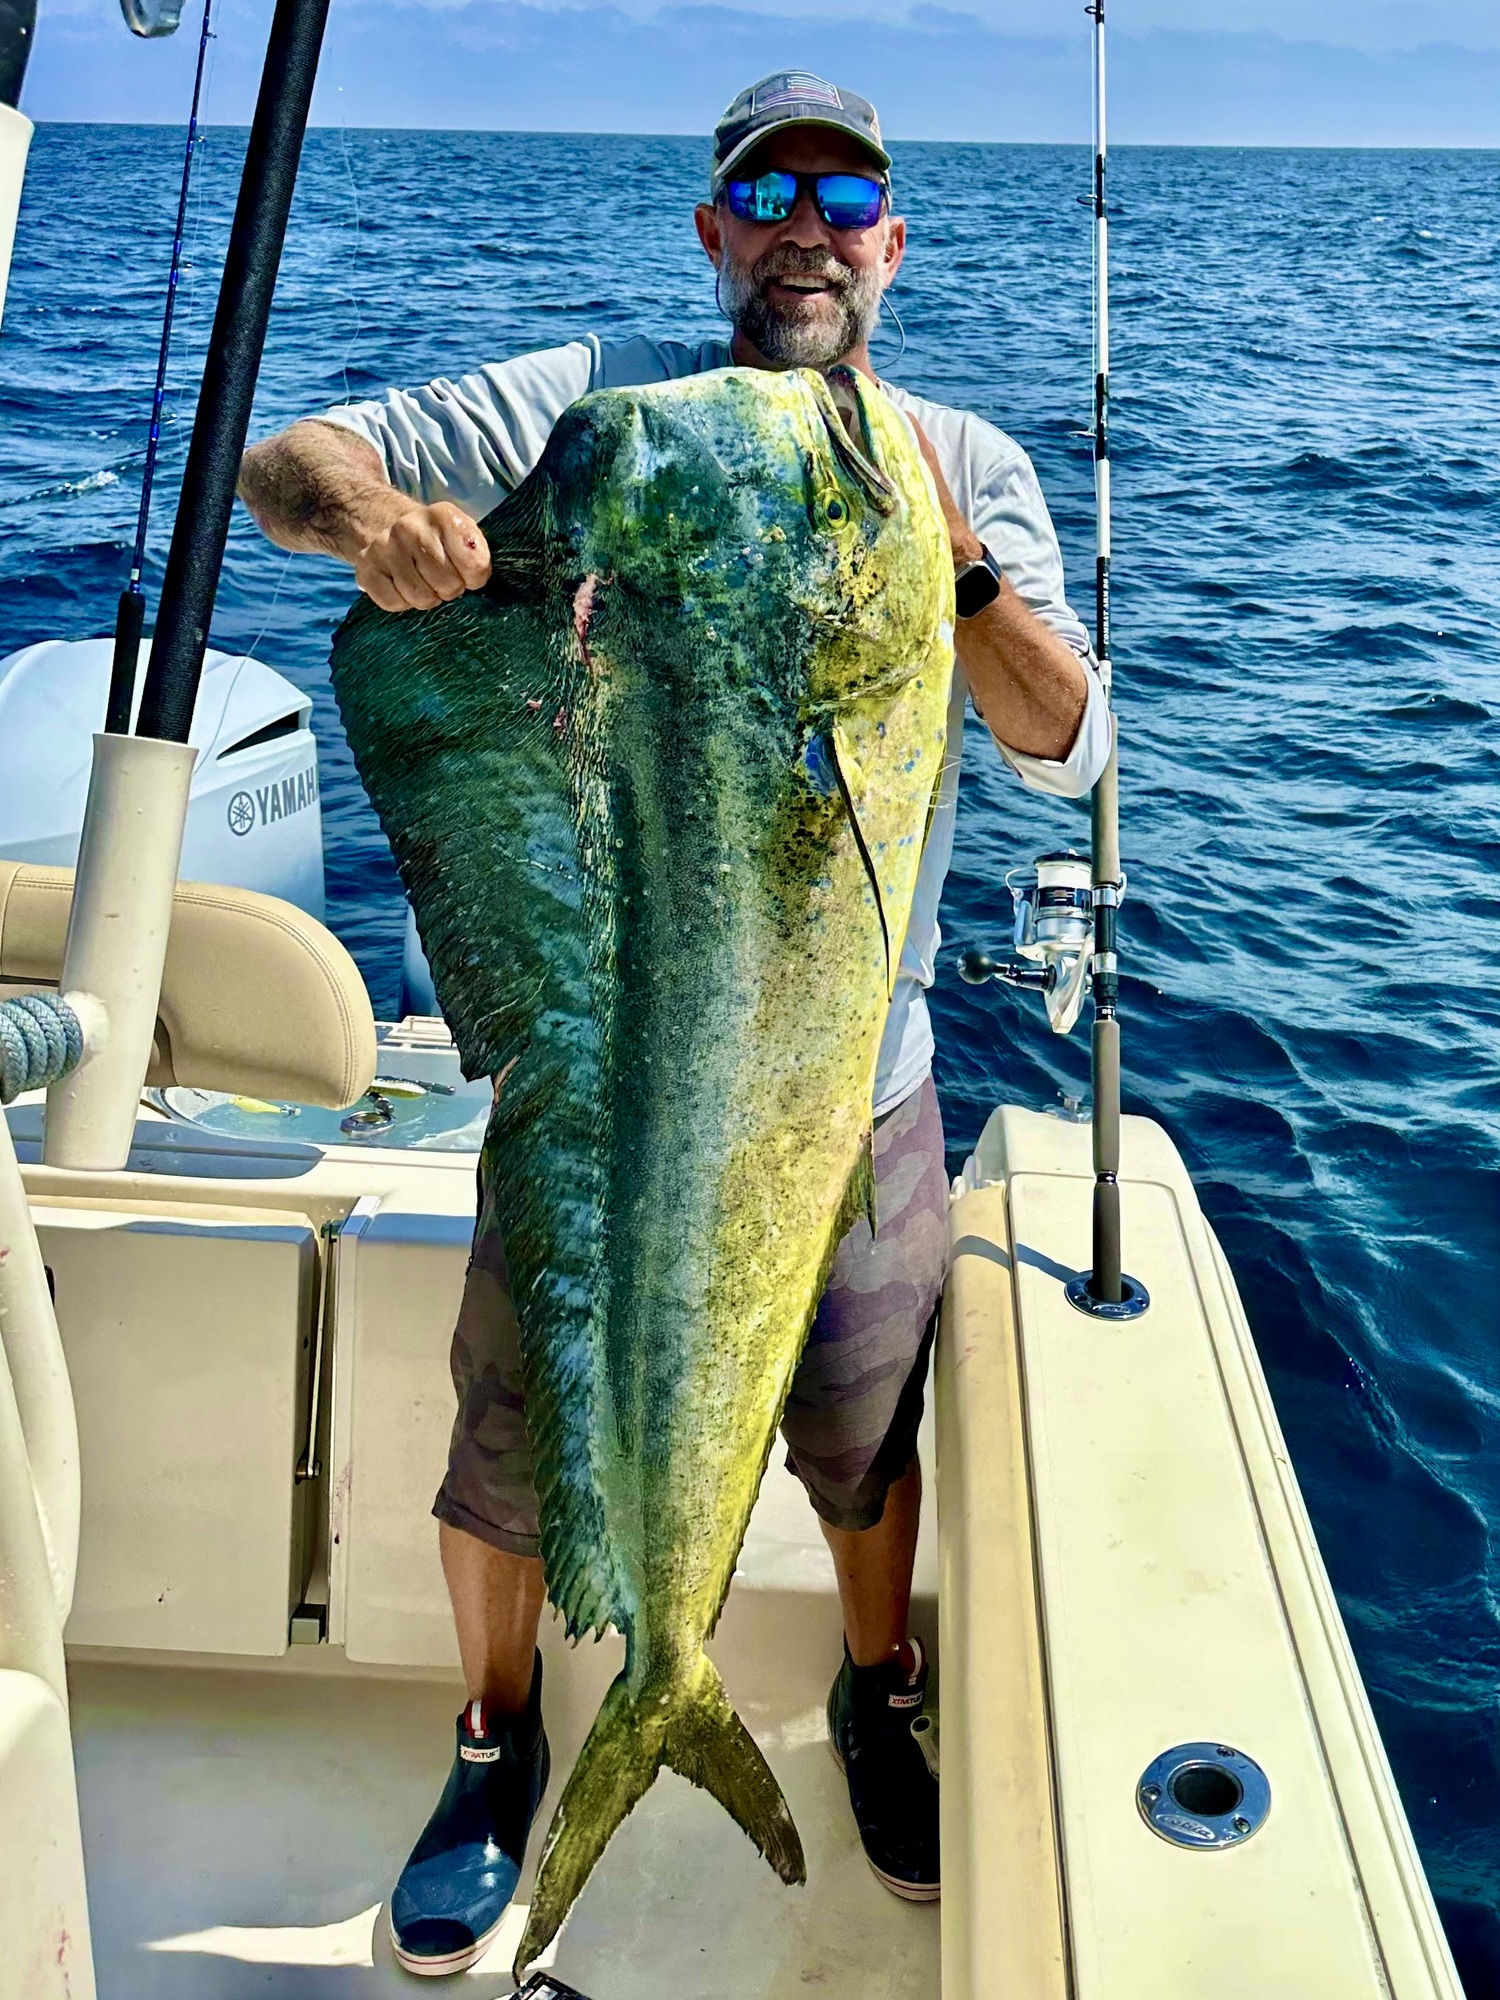 Rick Nydegger with the 51-pound dolphin, or mahi mahi, he caught off Hampton Bays recently, the largest specimen of the species landed a local dock in many years and one of the largest ever caught in the state.